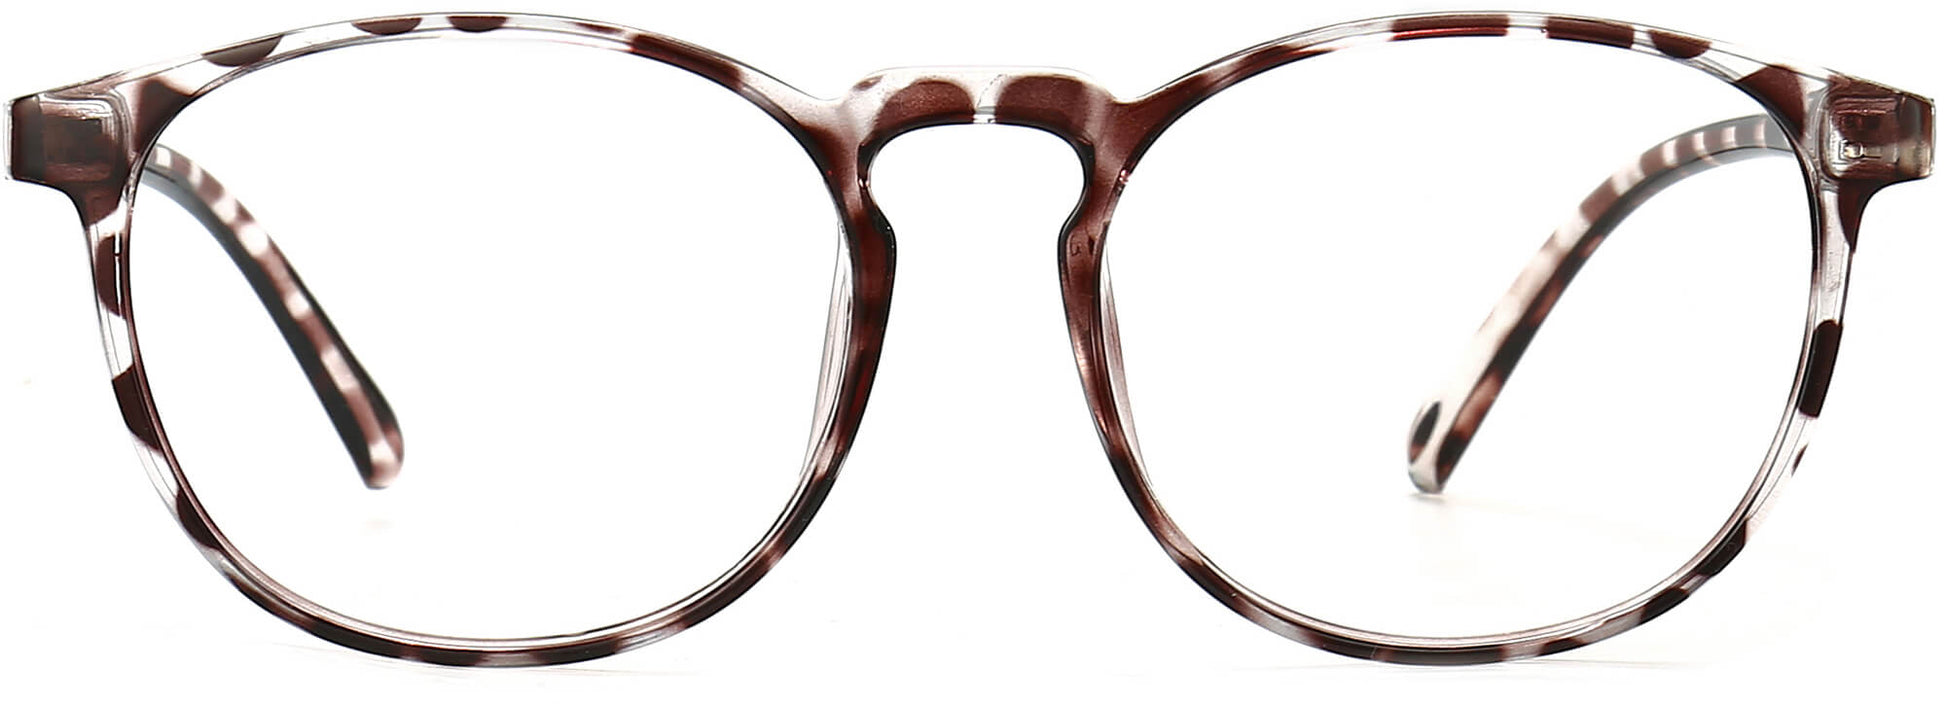 Kennedy Round Tortoise Eyeglasses from ANRRI, front view